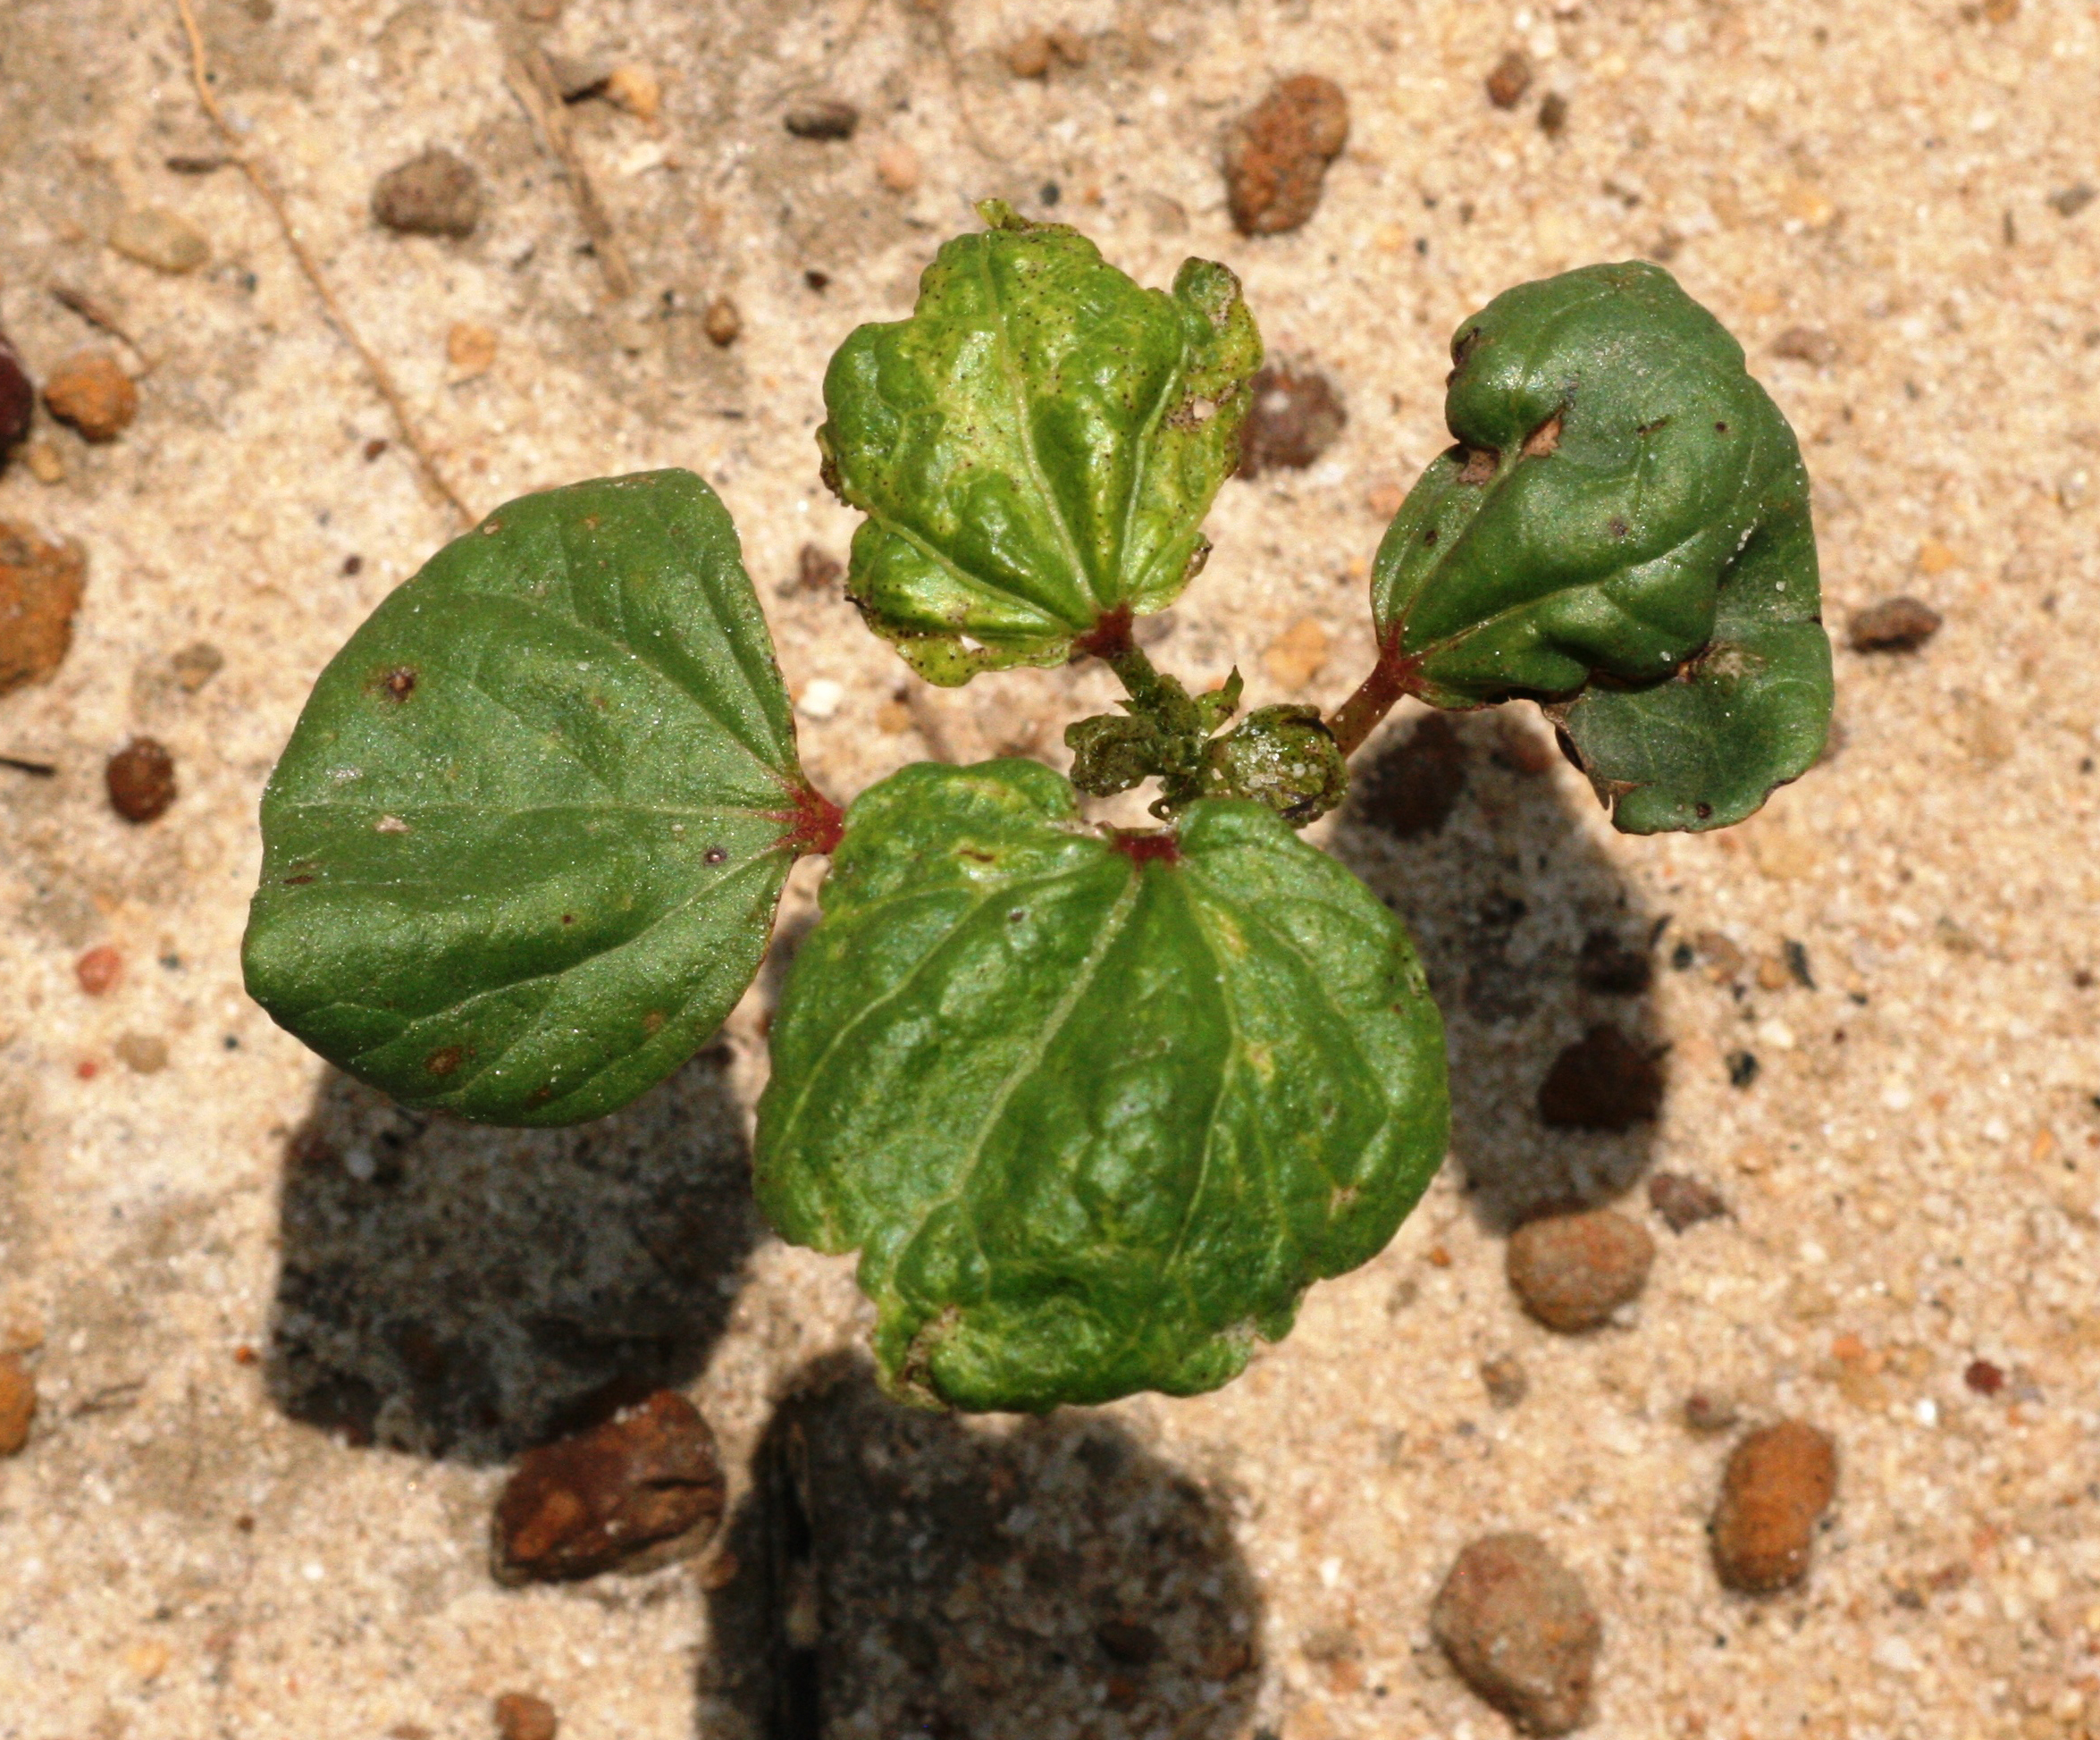 Pictured is a cotton plant impacted by thrips damage.